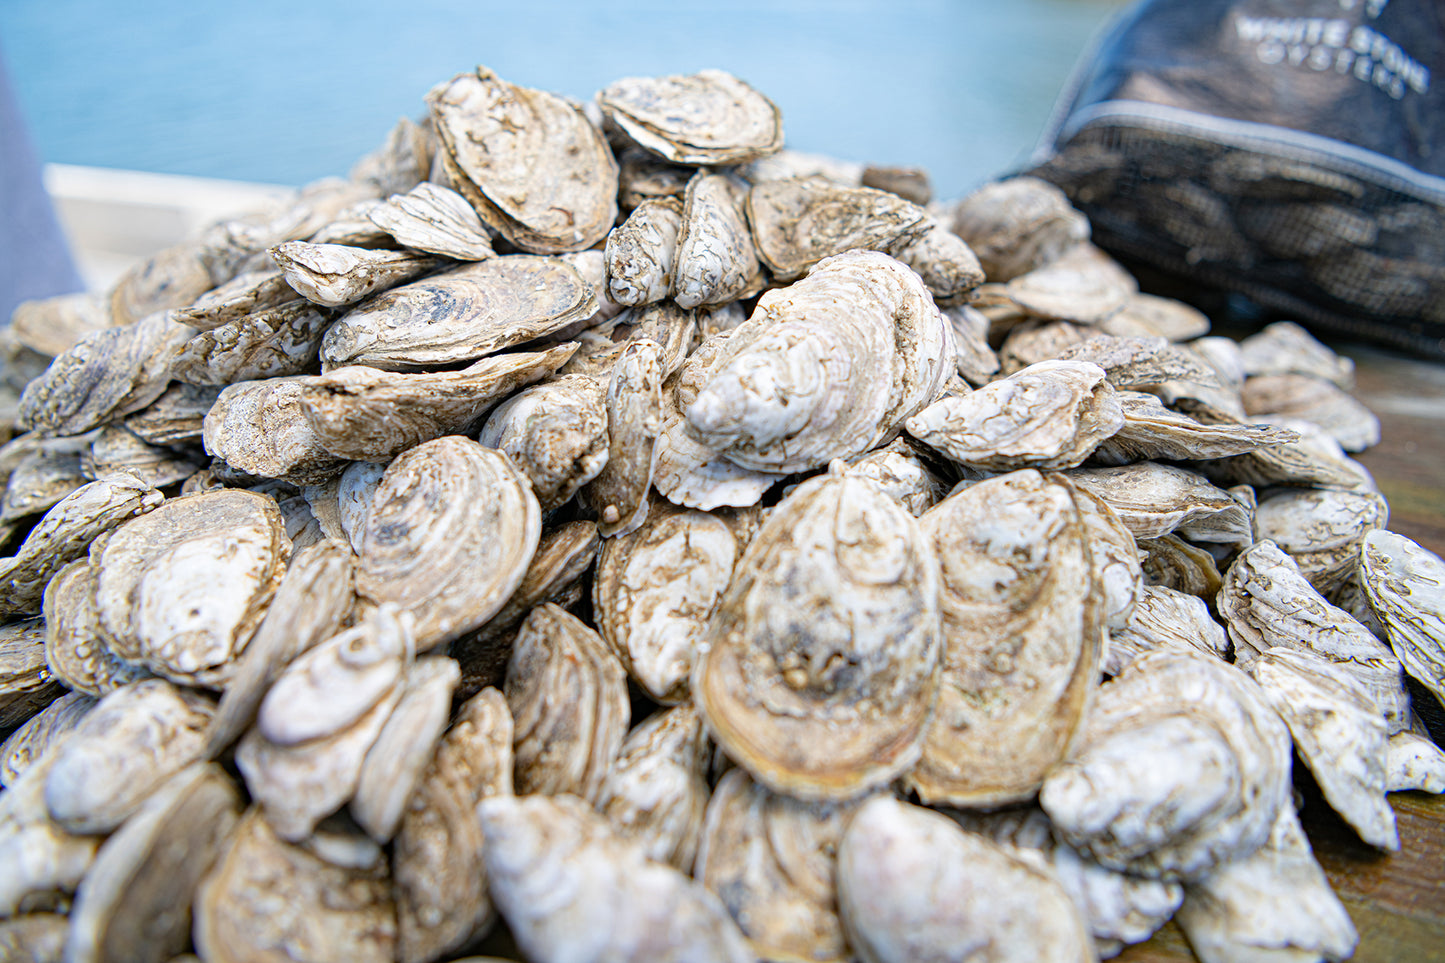 How to Recycle Your Oyster Shells